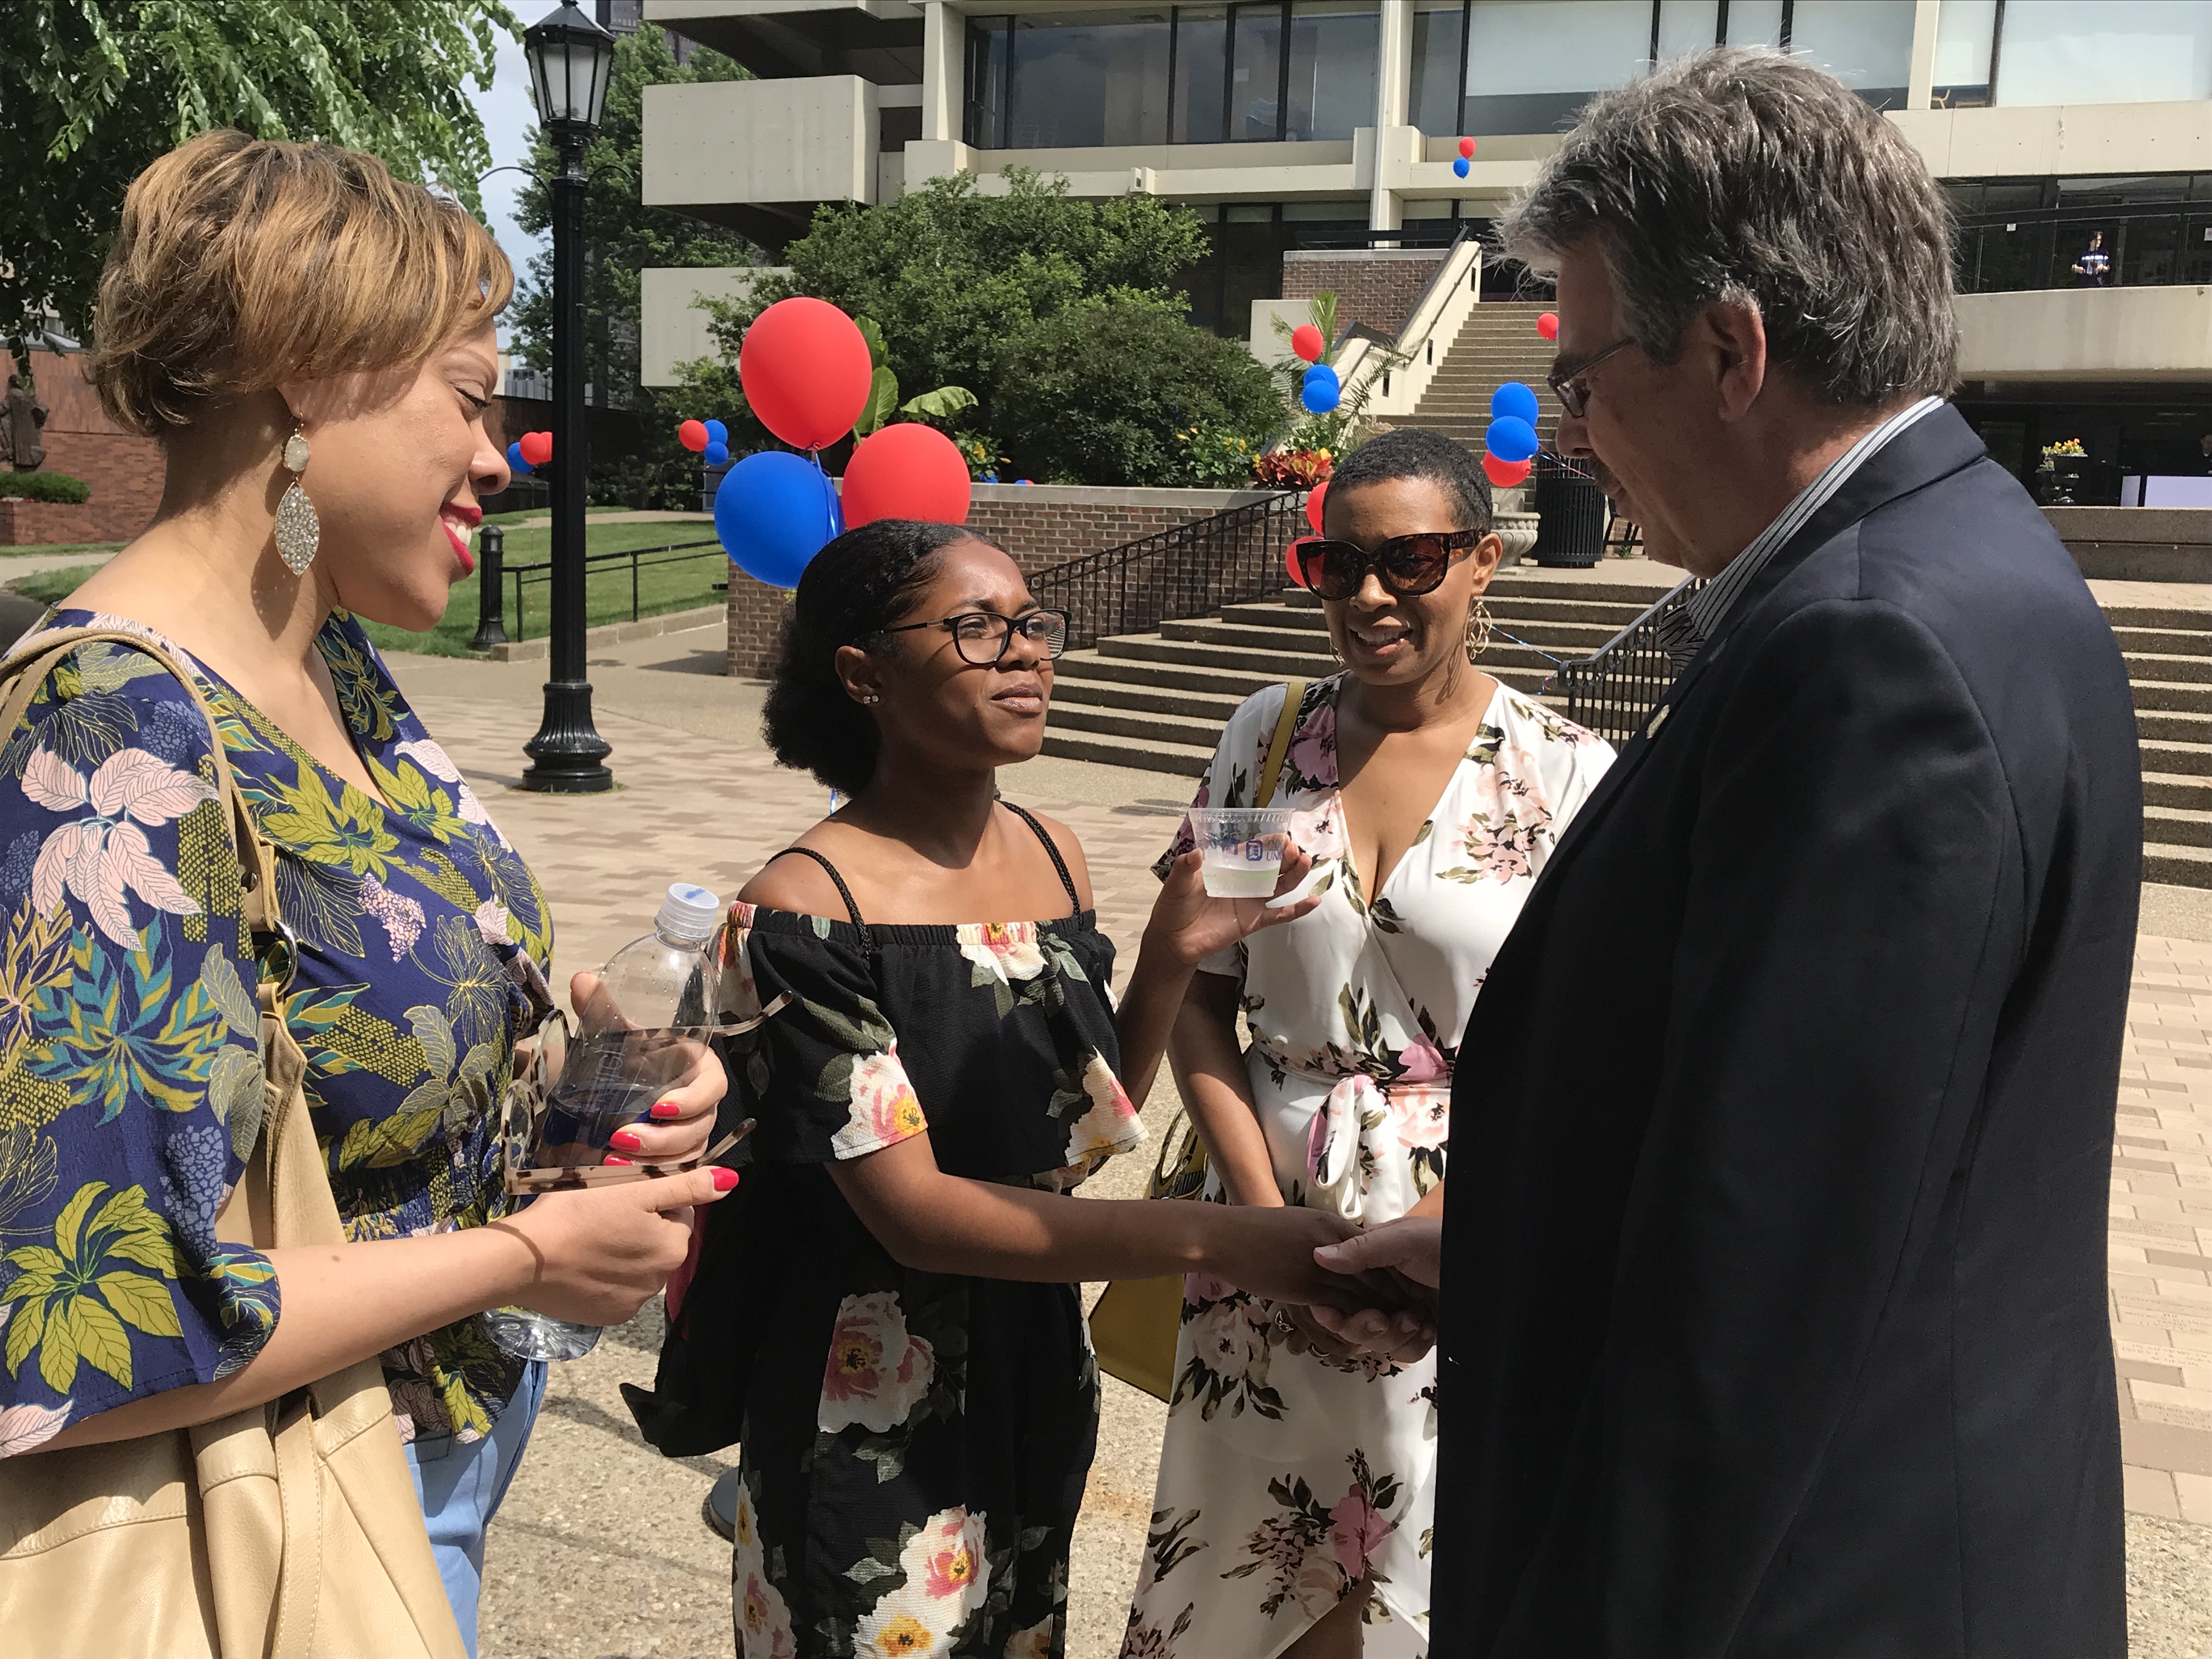 Duquesne Welcomes High Schoolers to Campus for DuquesneFest